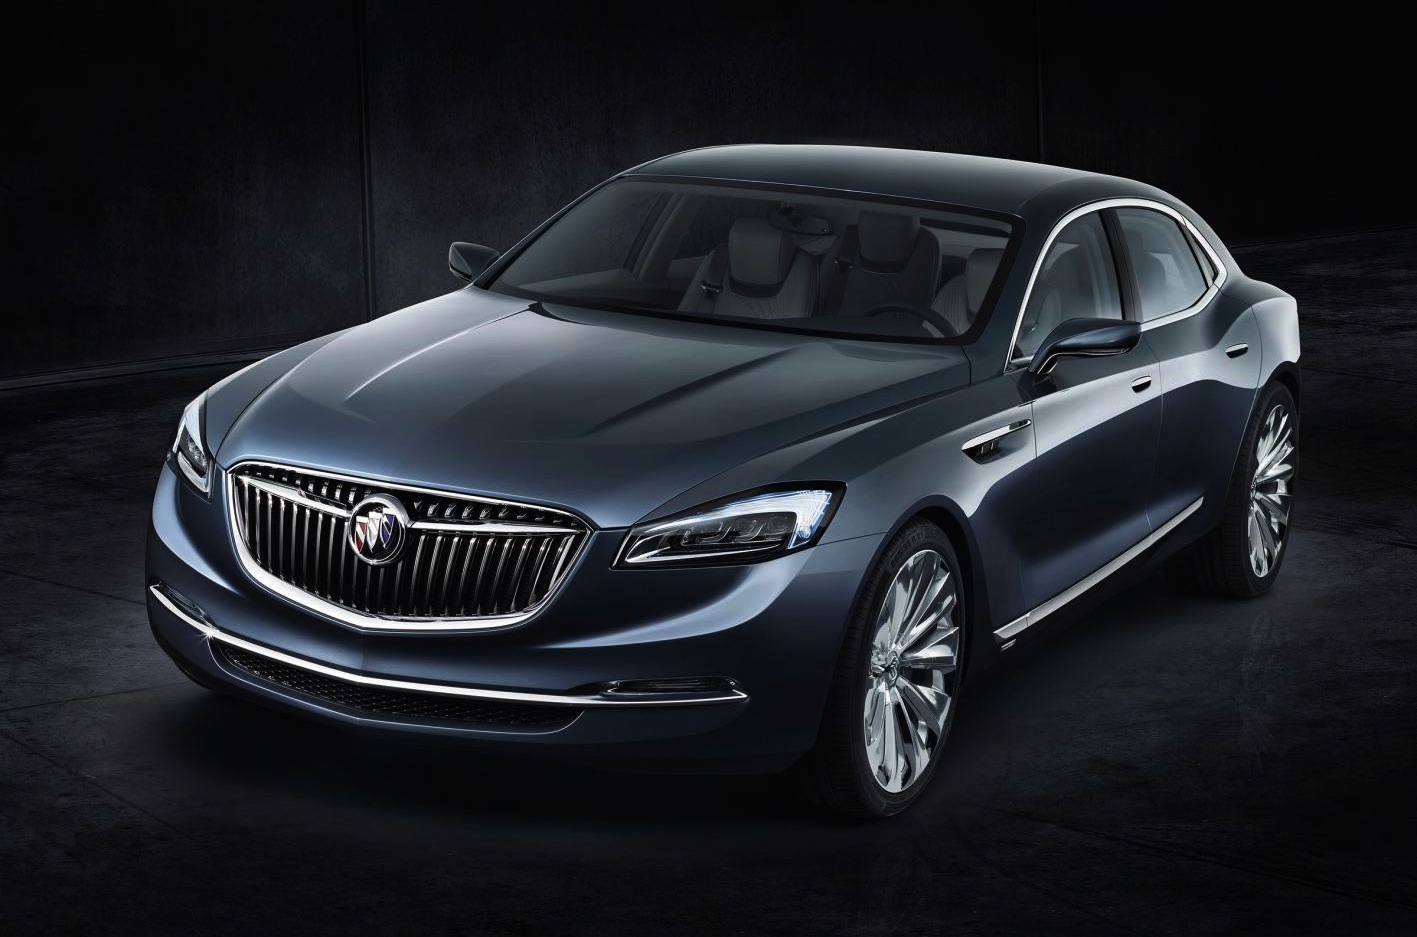 Buick Avenir concept revealed, potential post-2017 Commodore?